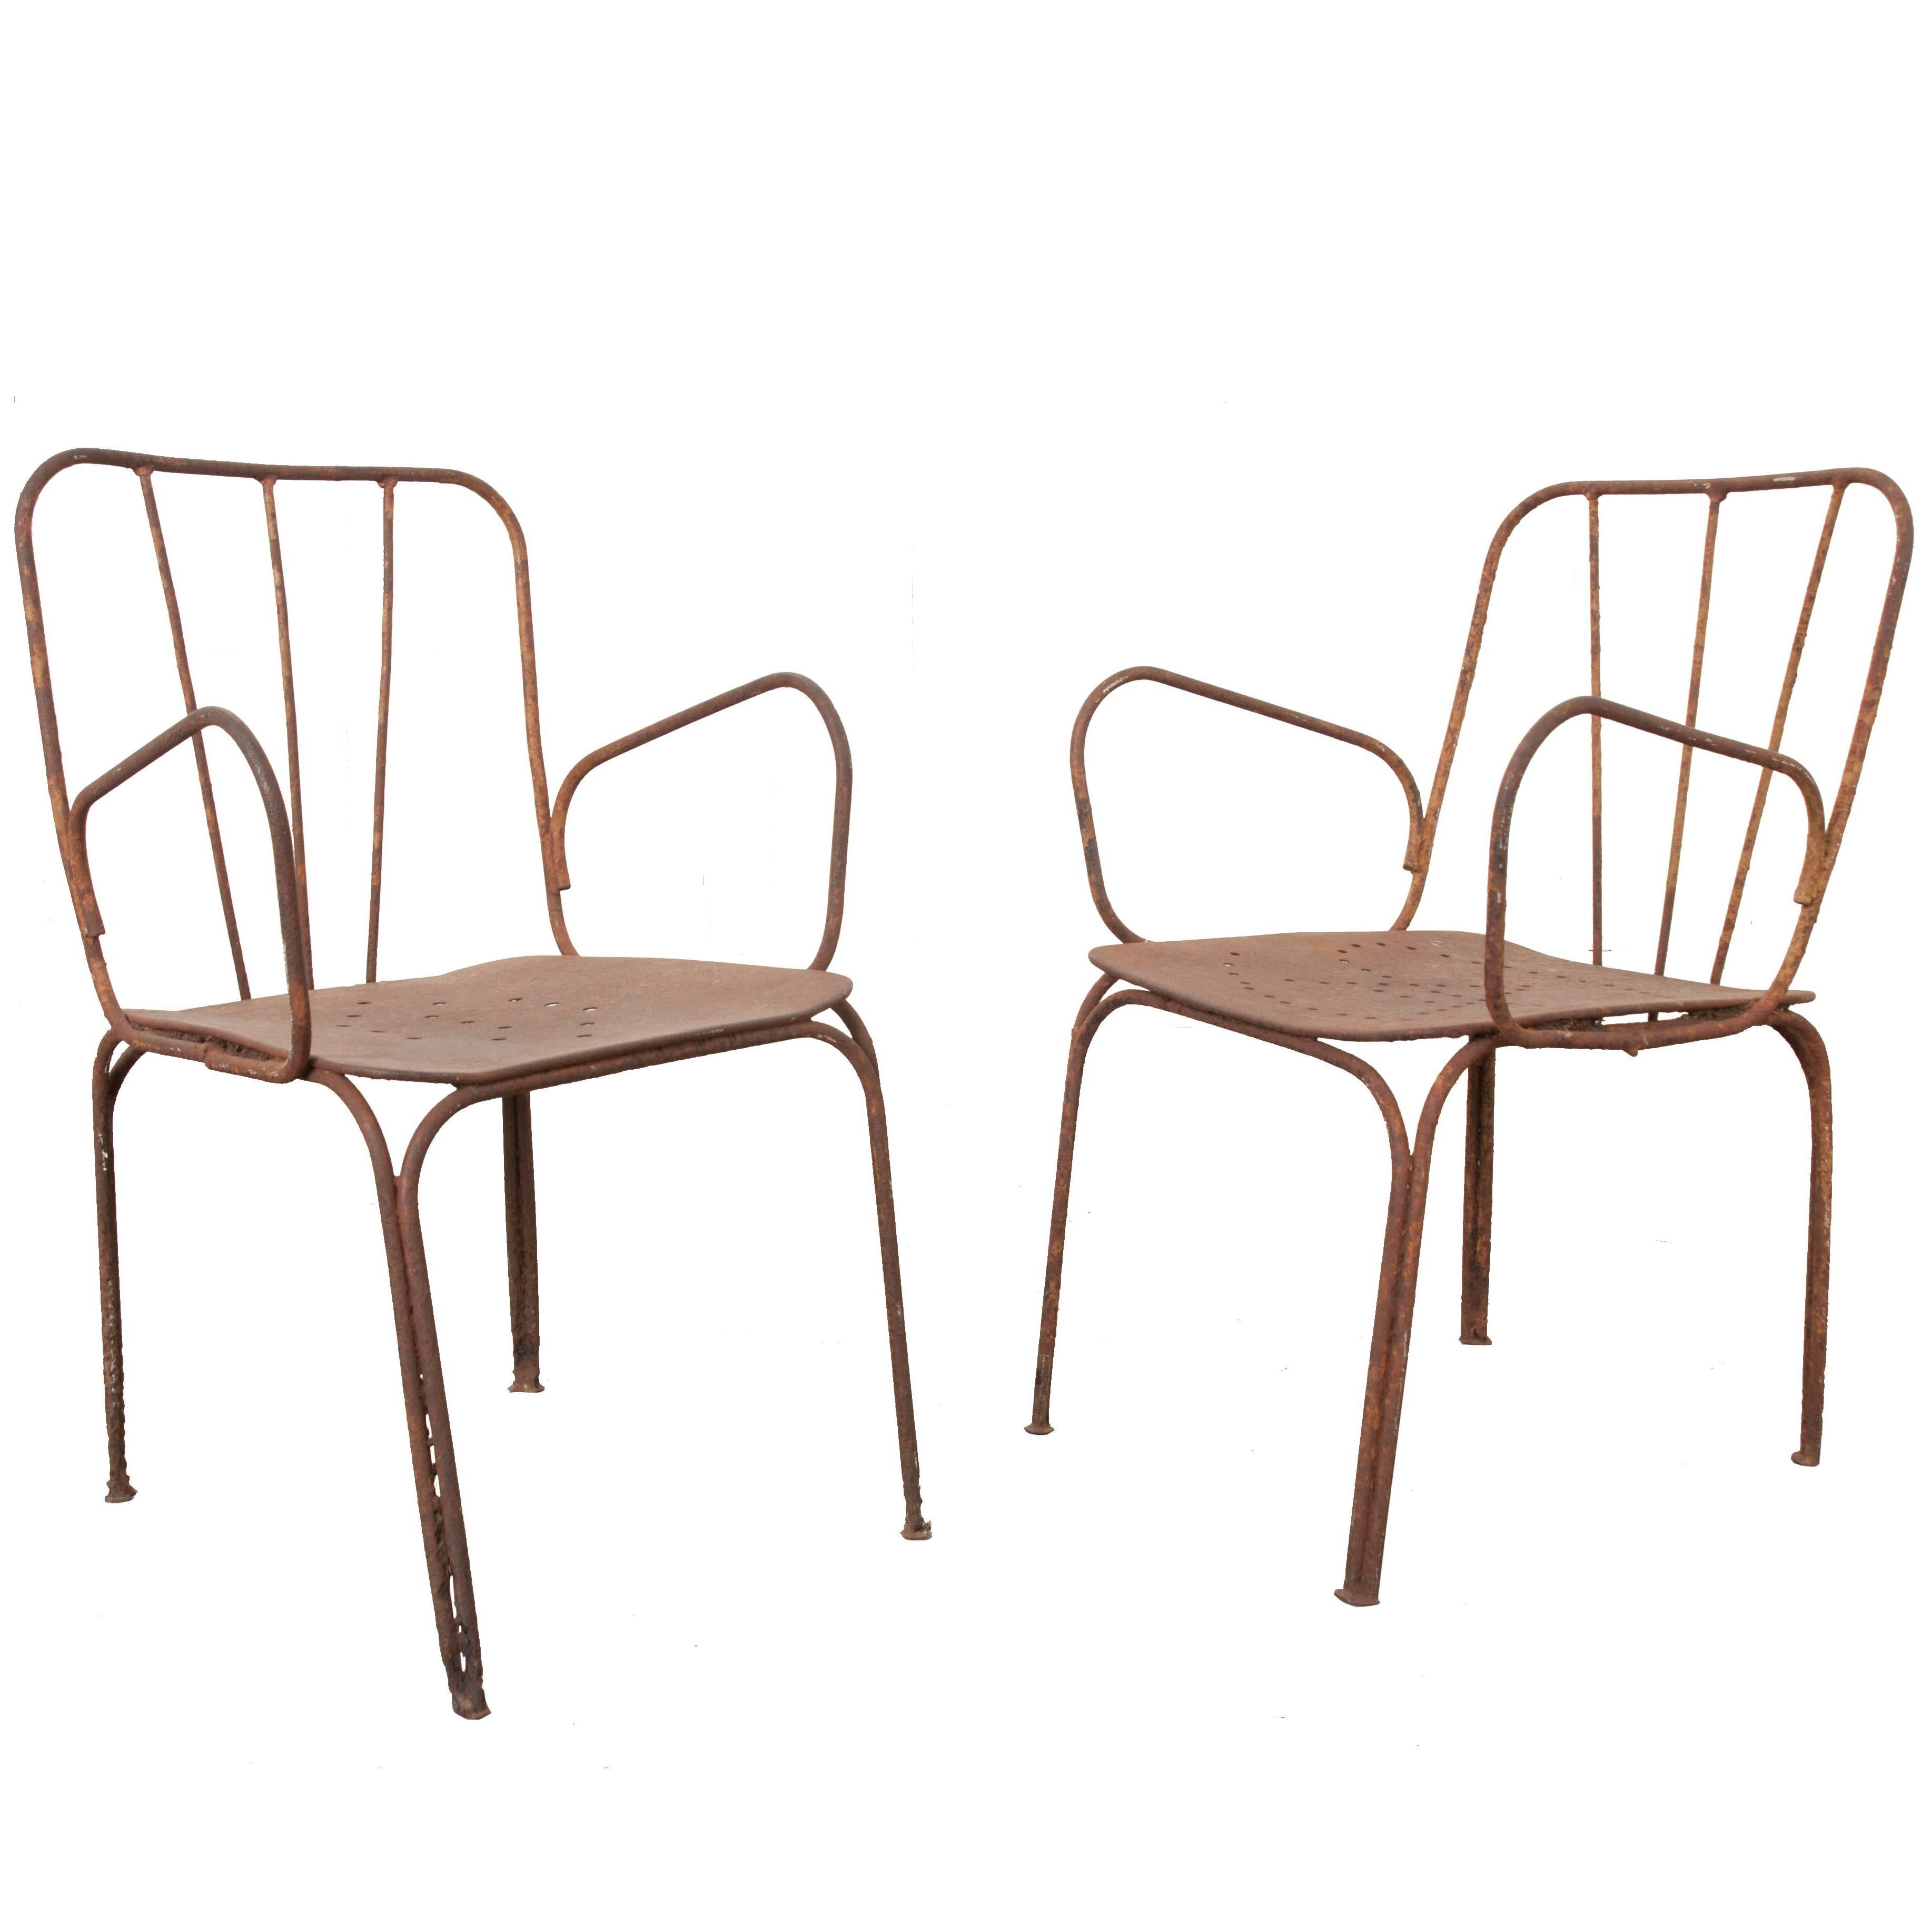 Pair of Early 20th Century French Metal Chairs